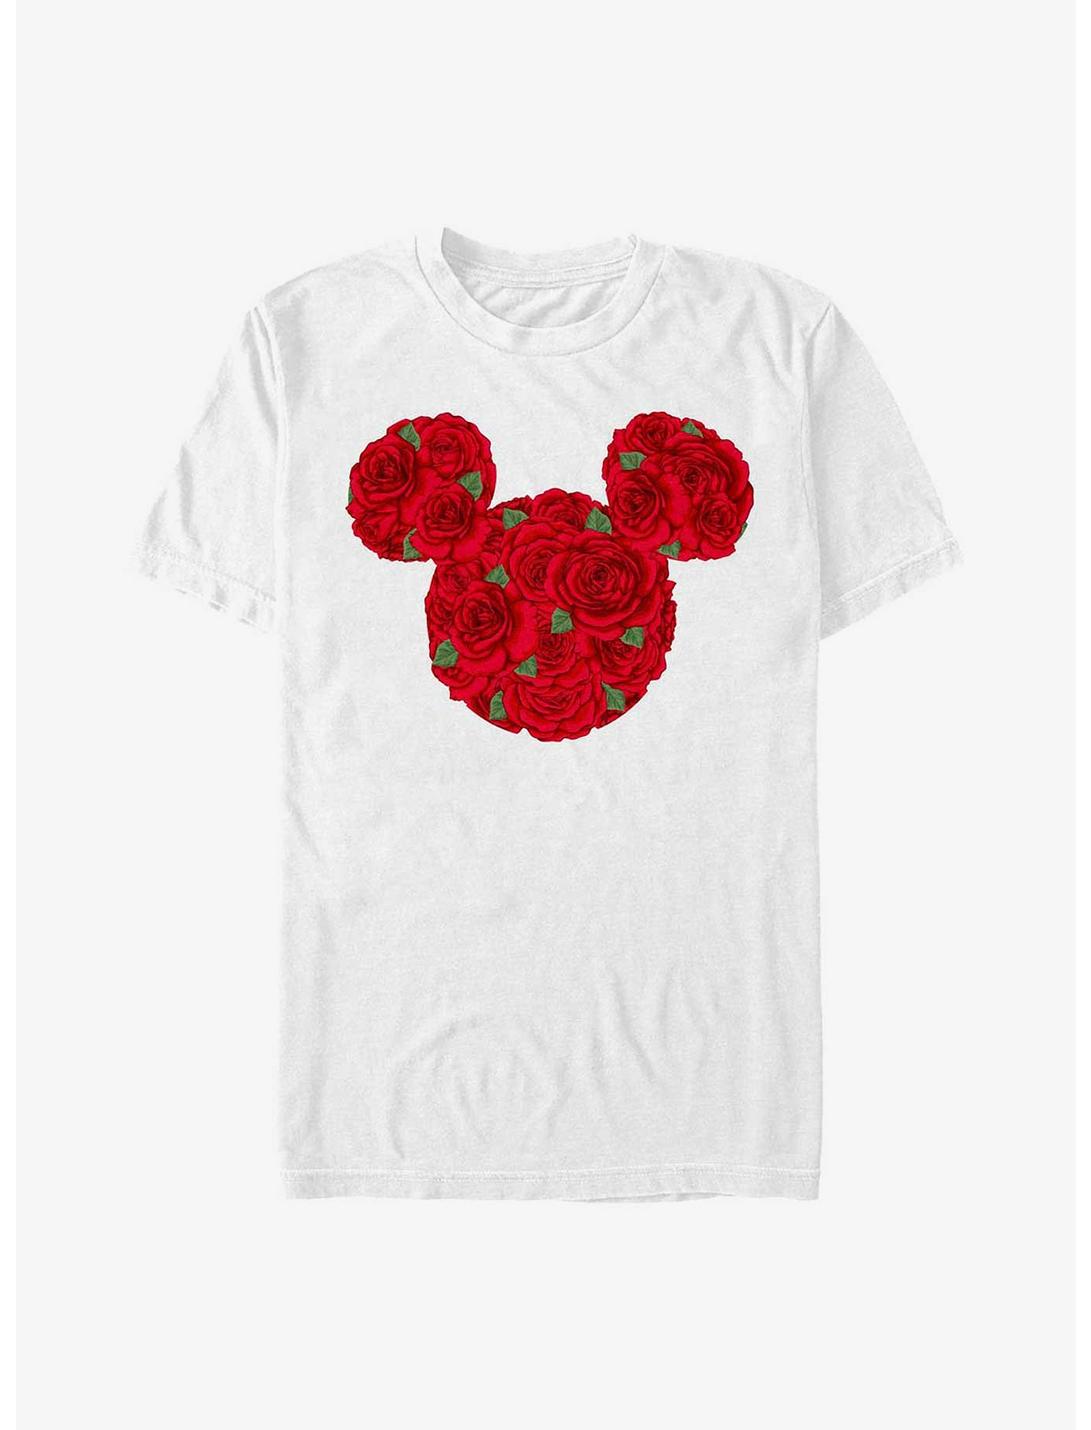 Disney Minnie Mouse Mickey Mouse Roses T-Shirt, WHITE, hi-res